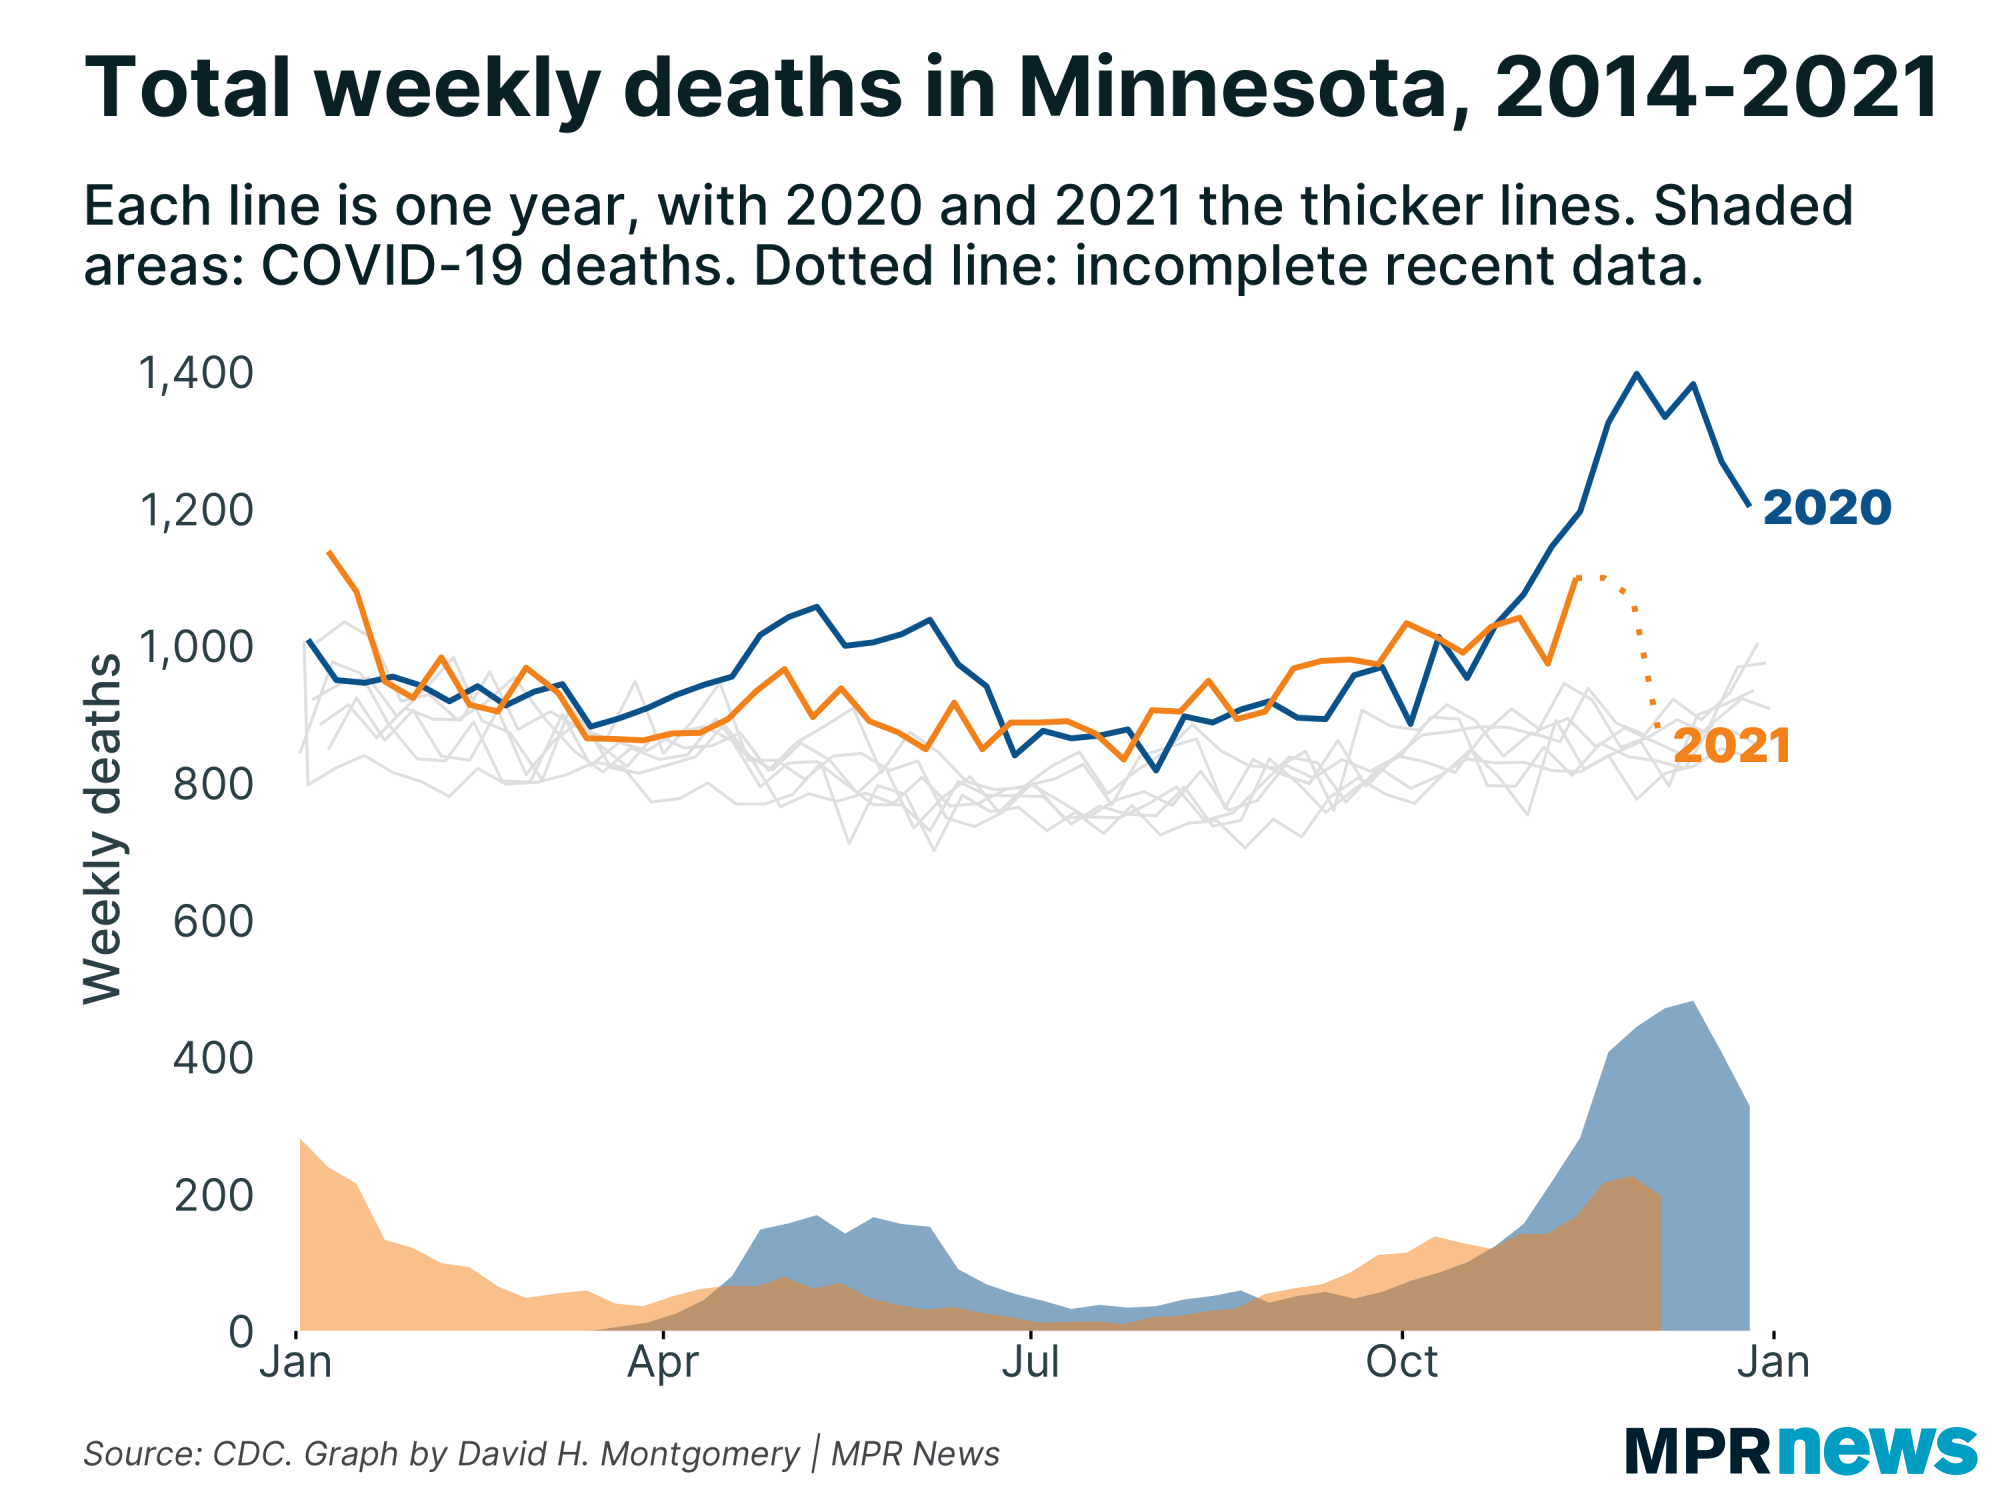 Graph of total Minnesota deaths vs. confirmed COVID-19 deaths